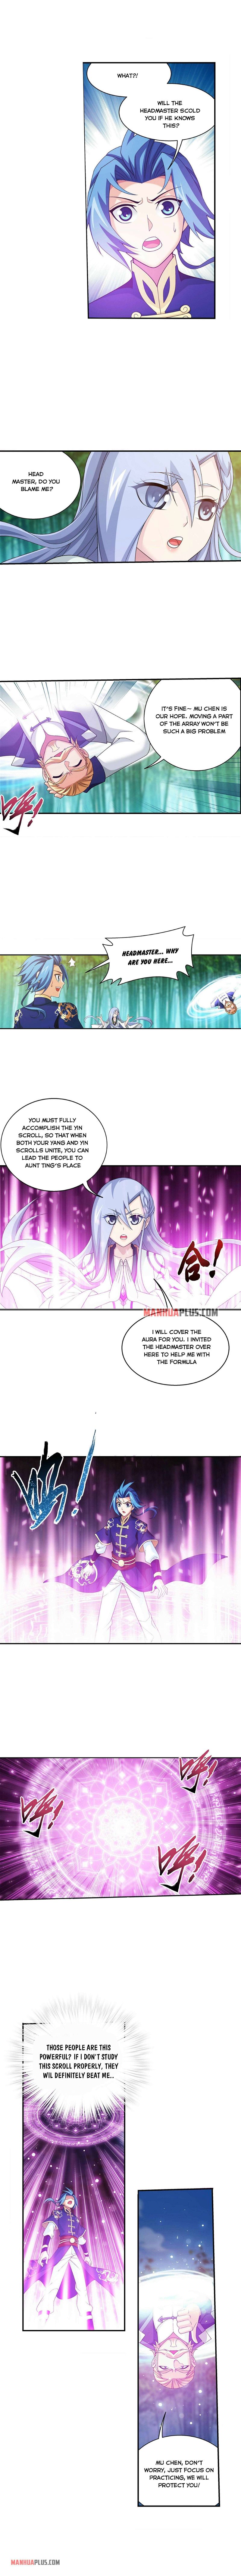 The Great Ruler Chapter 276 page 4